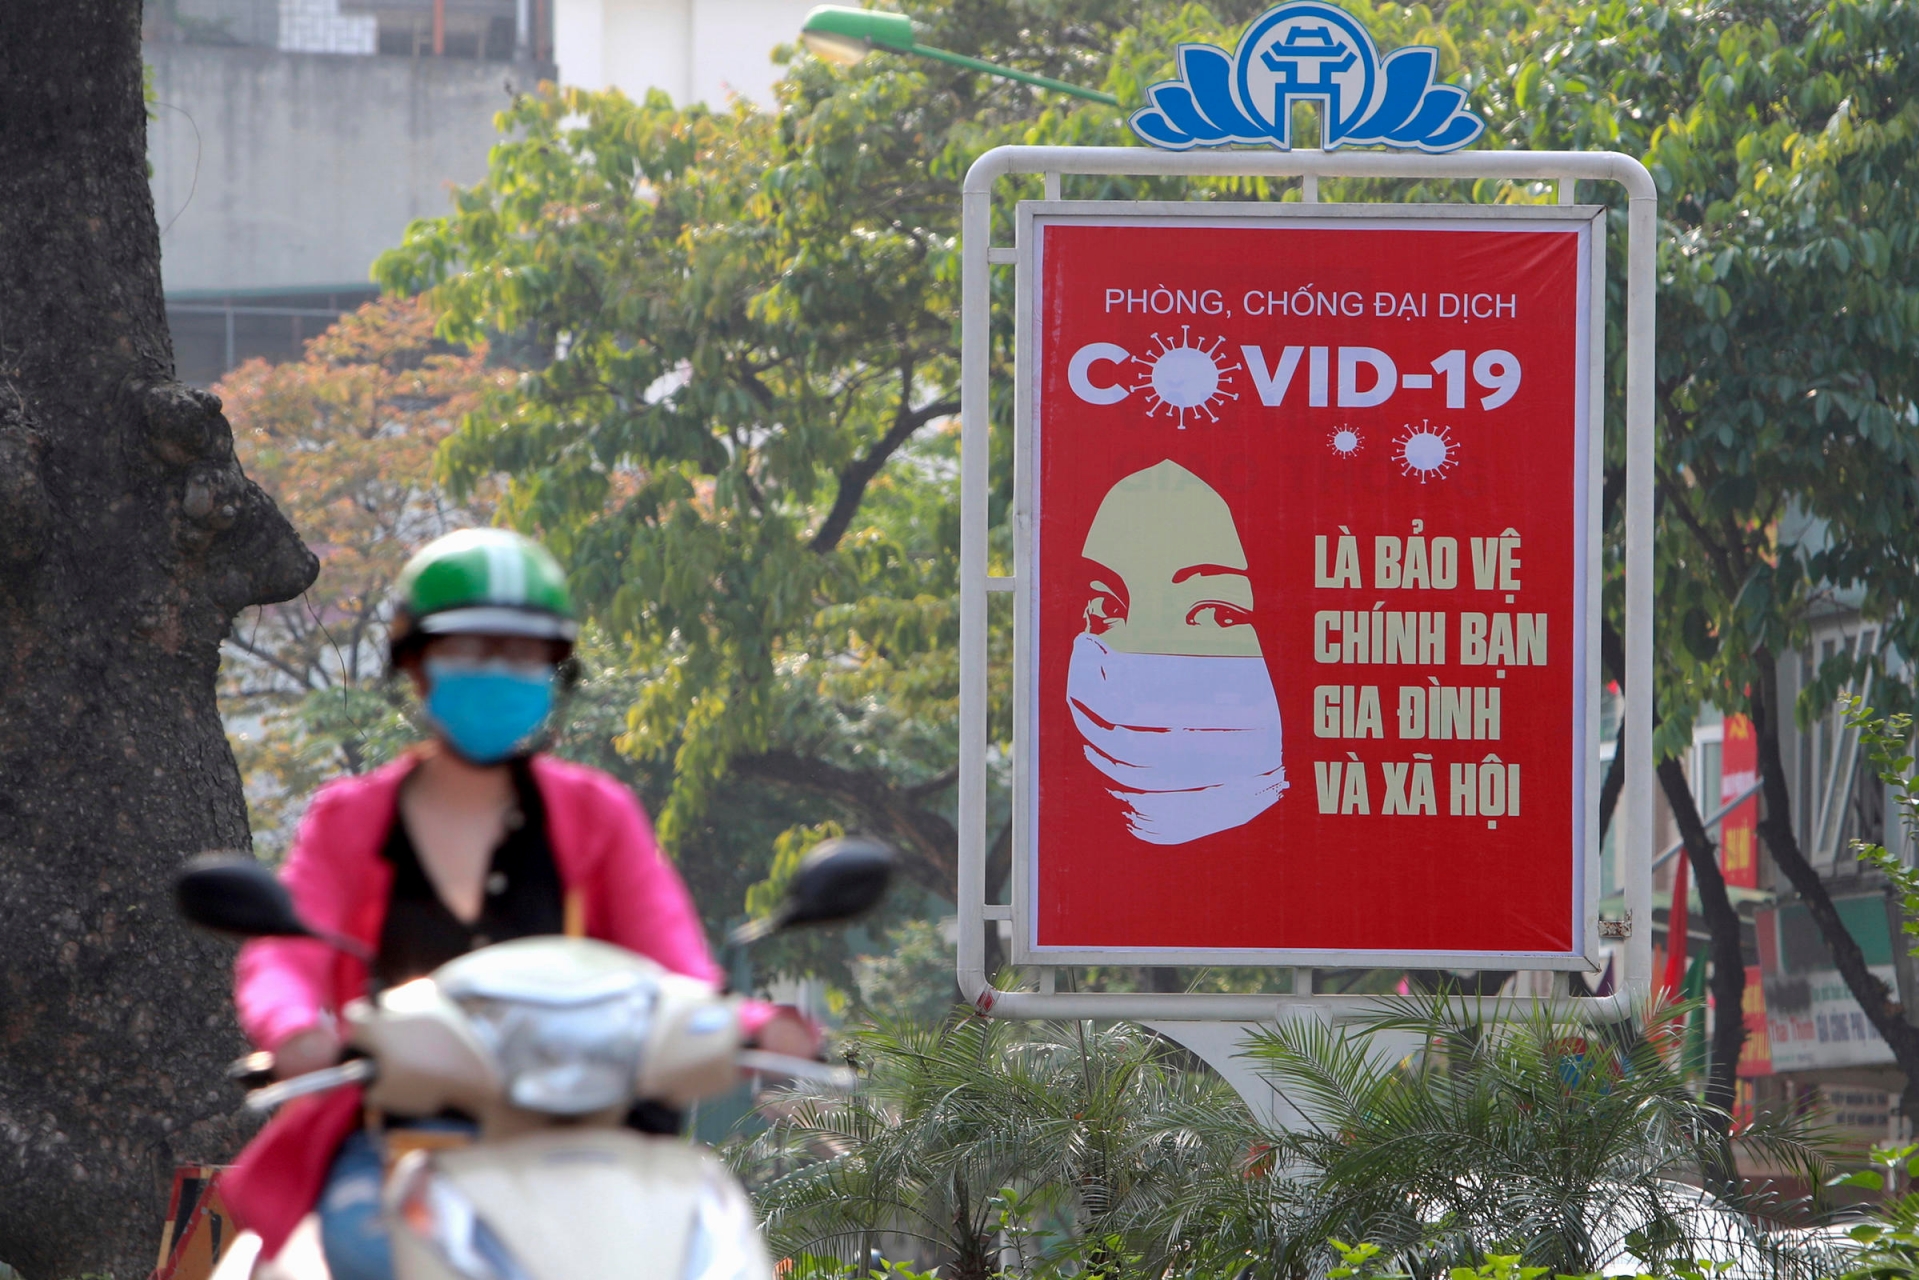 vietnam news today vietnam funded over usd21 million to fight climate change